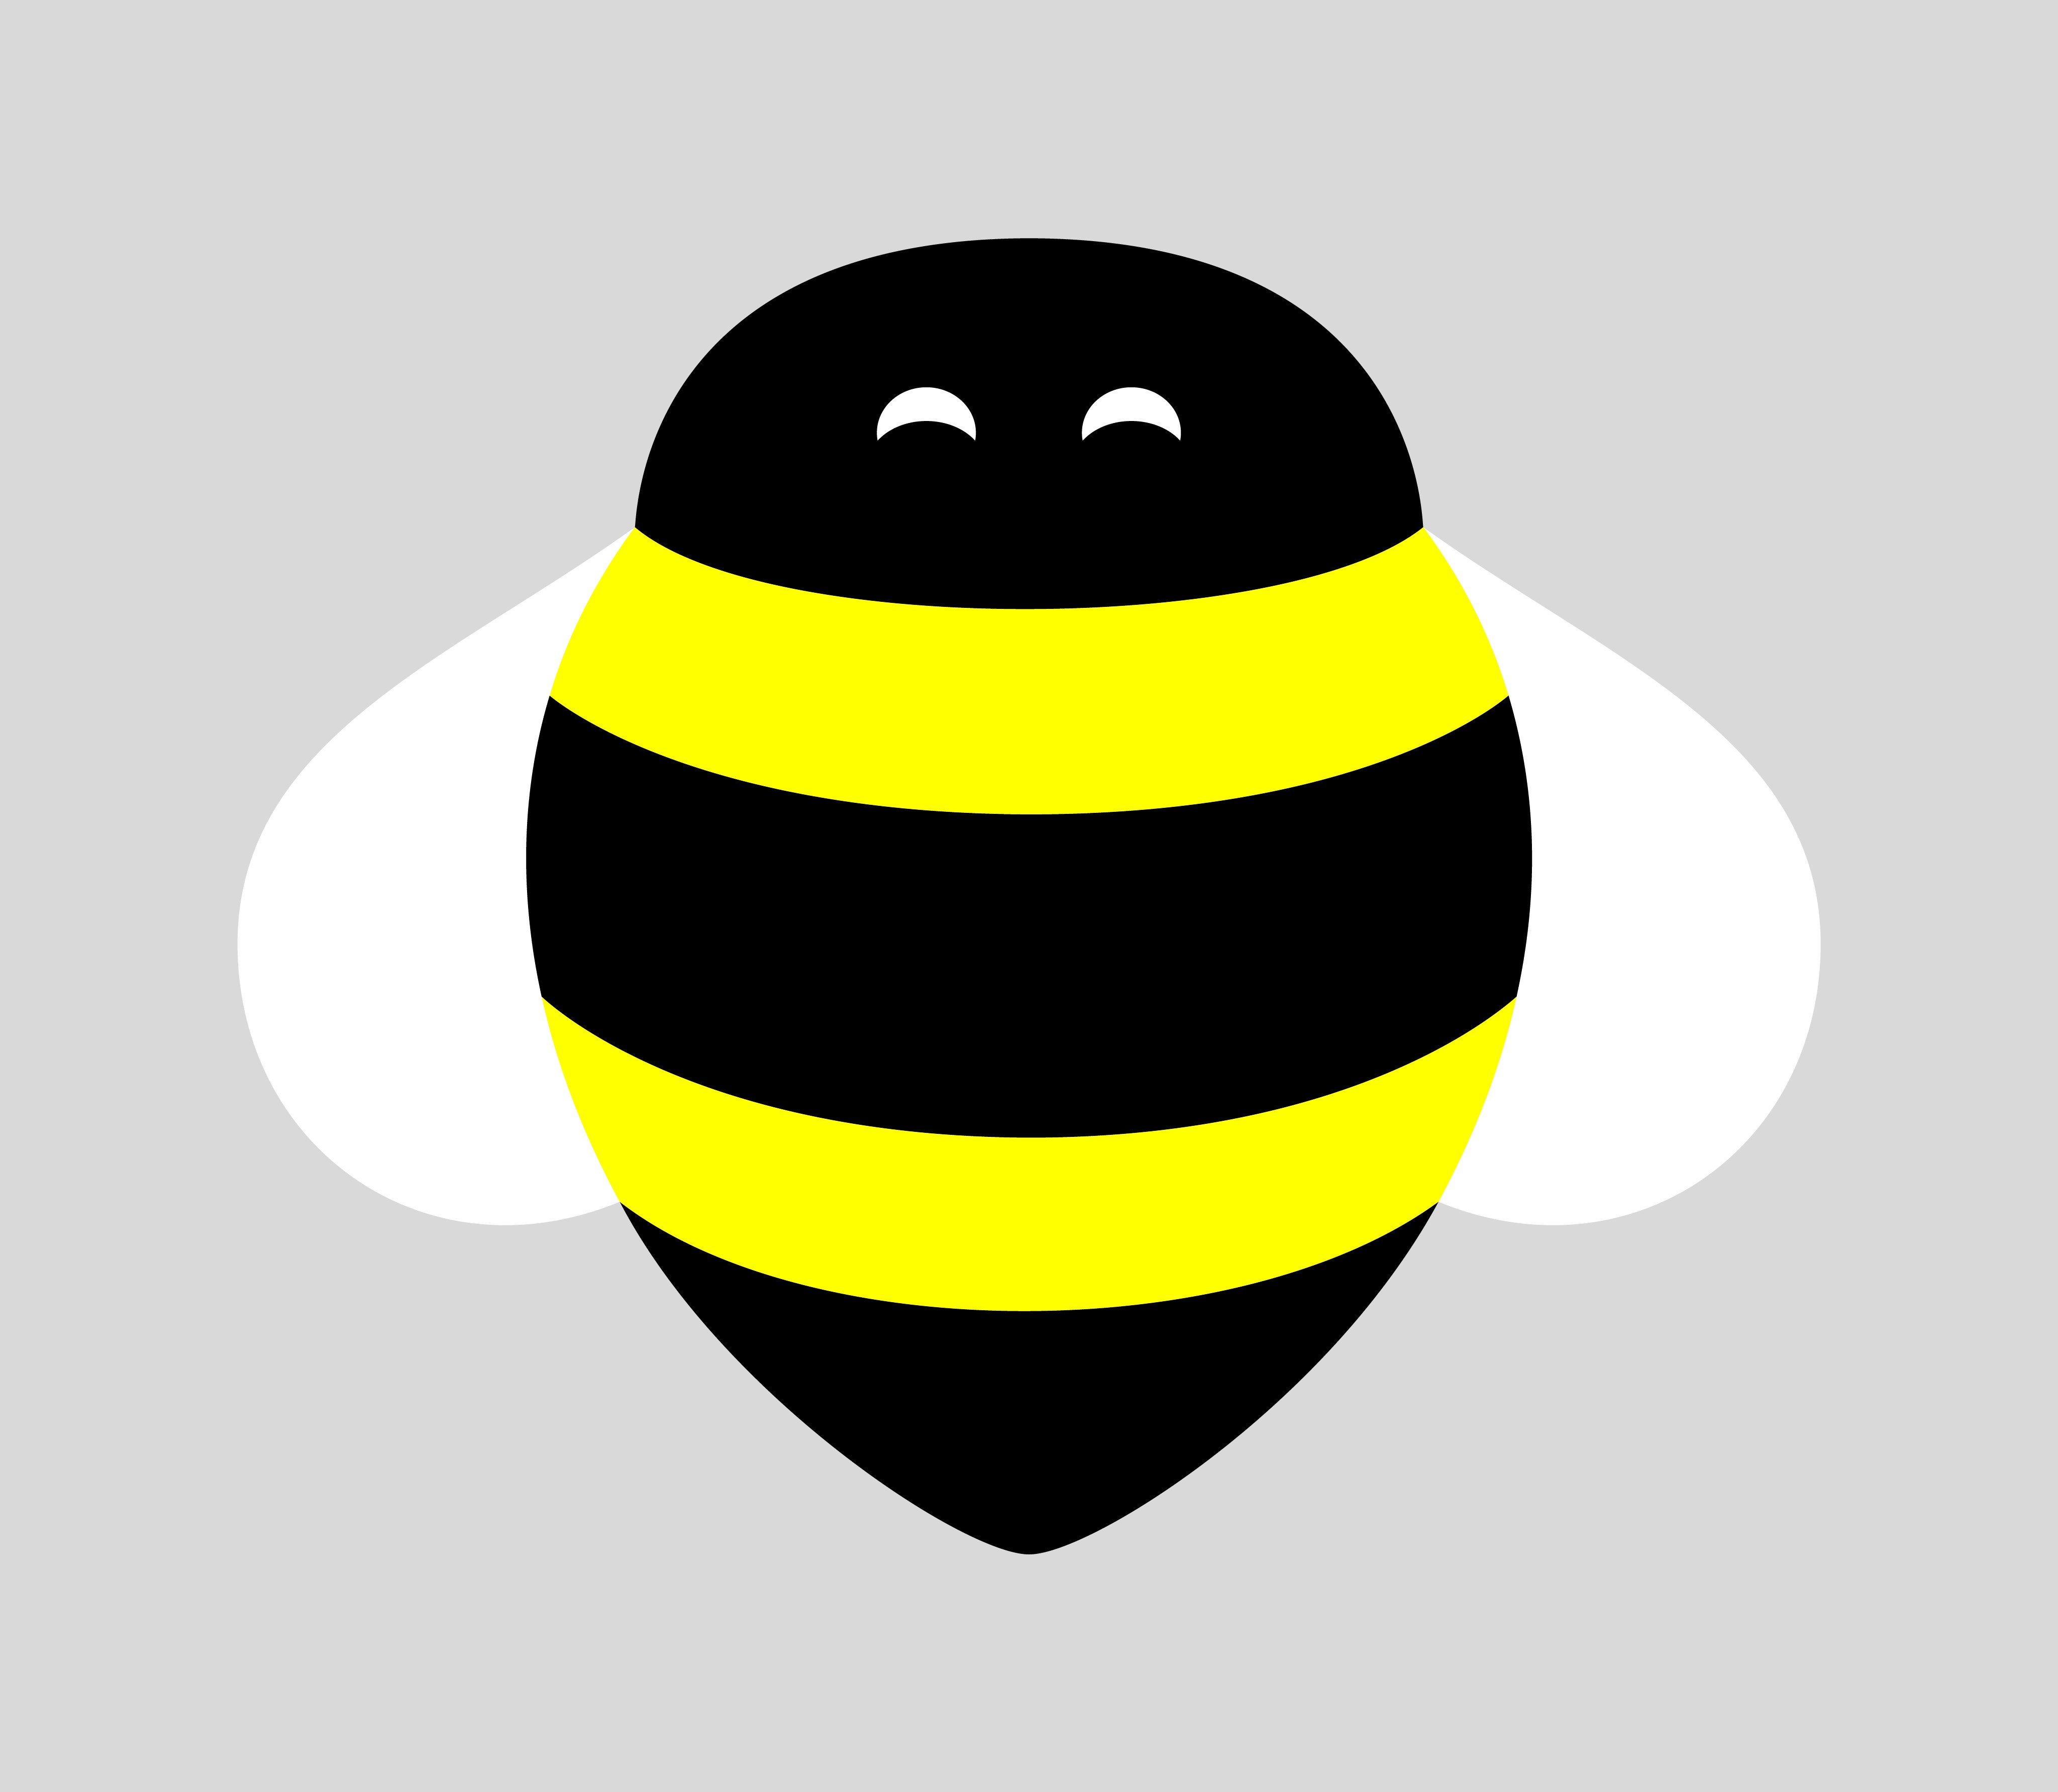 BEES bee image